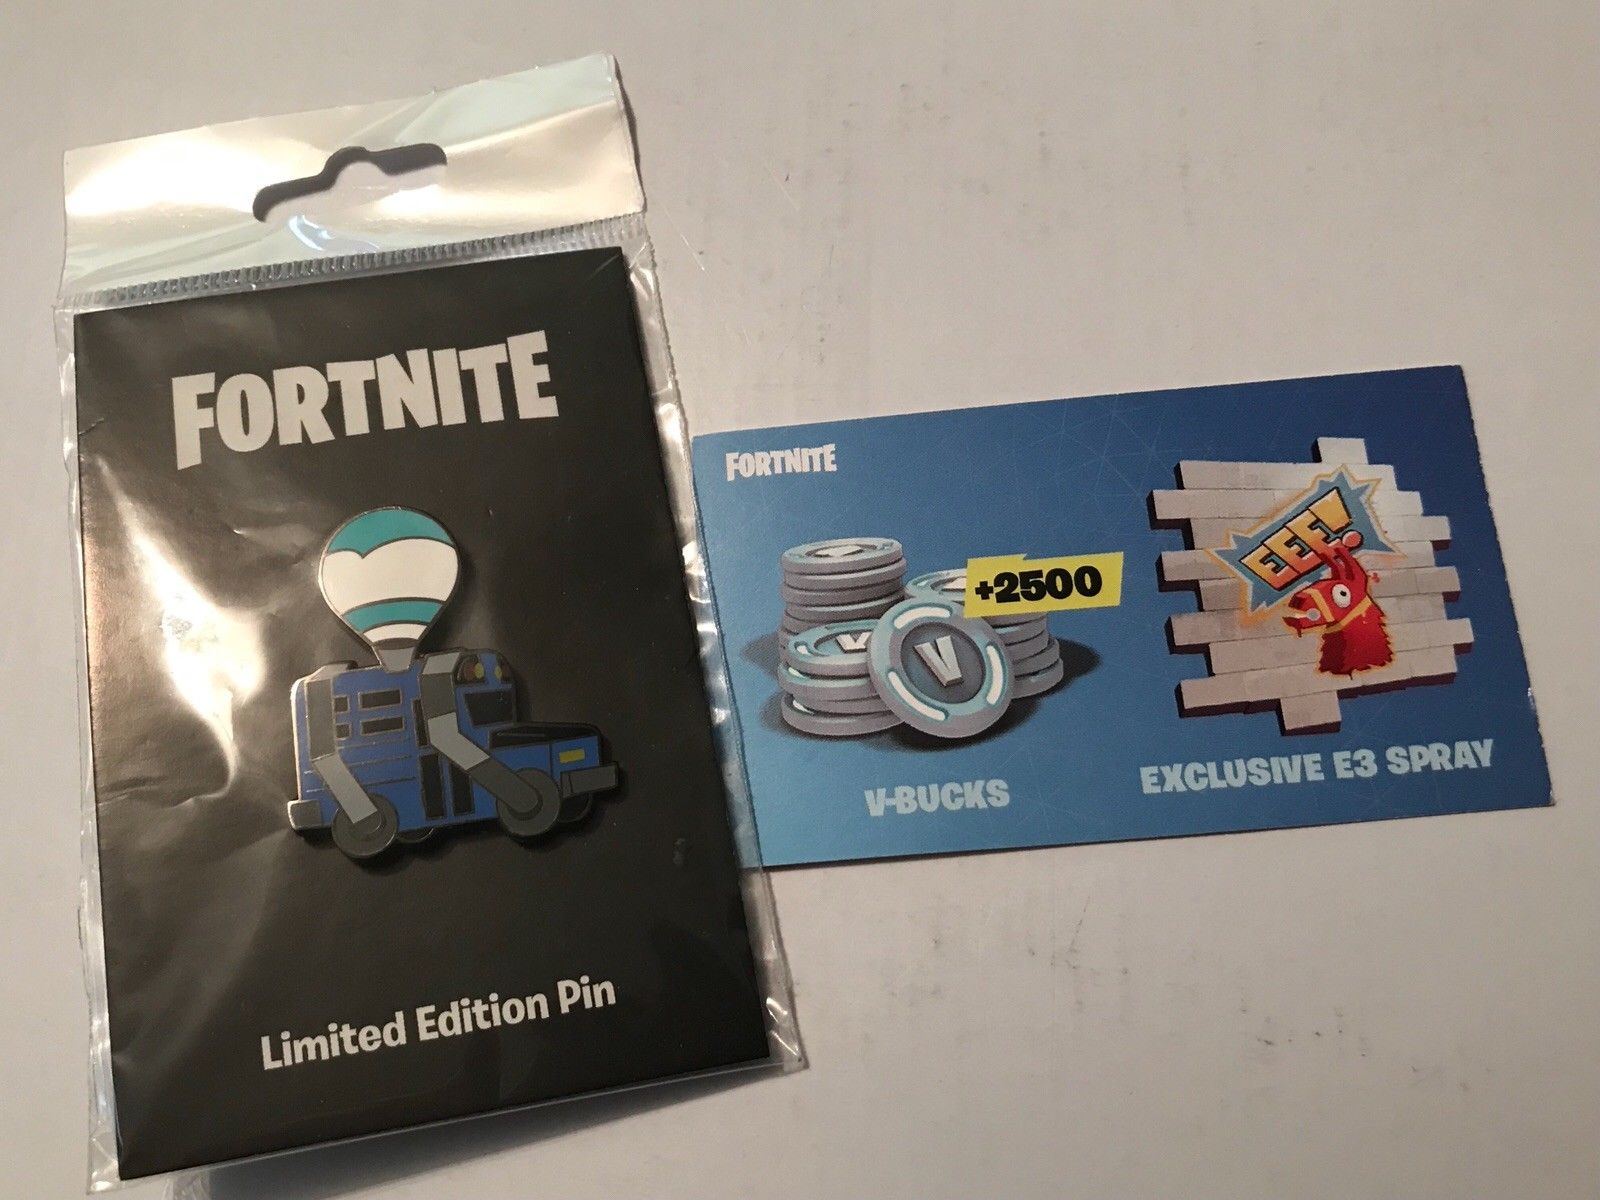 epic gave out goodie bags at their special e3 2018 event which included some swag as well as codes for 2 500 v bucks turns out fans are super eager to - e3 fortnite 2018